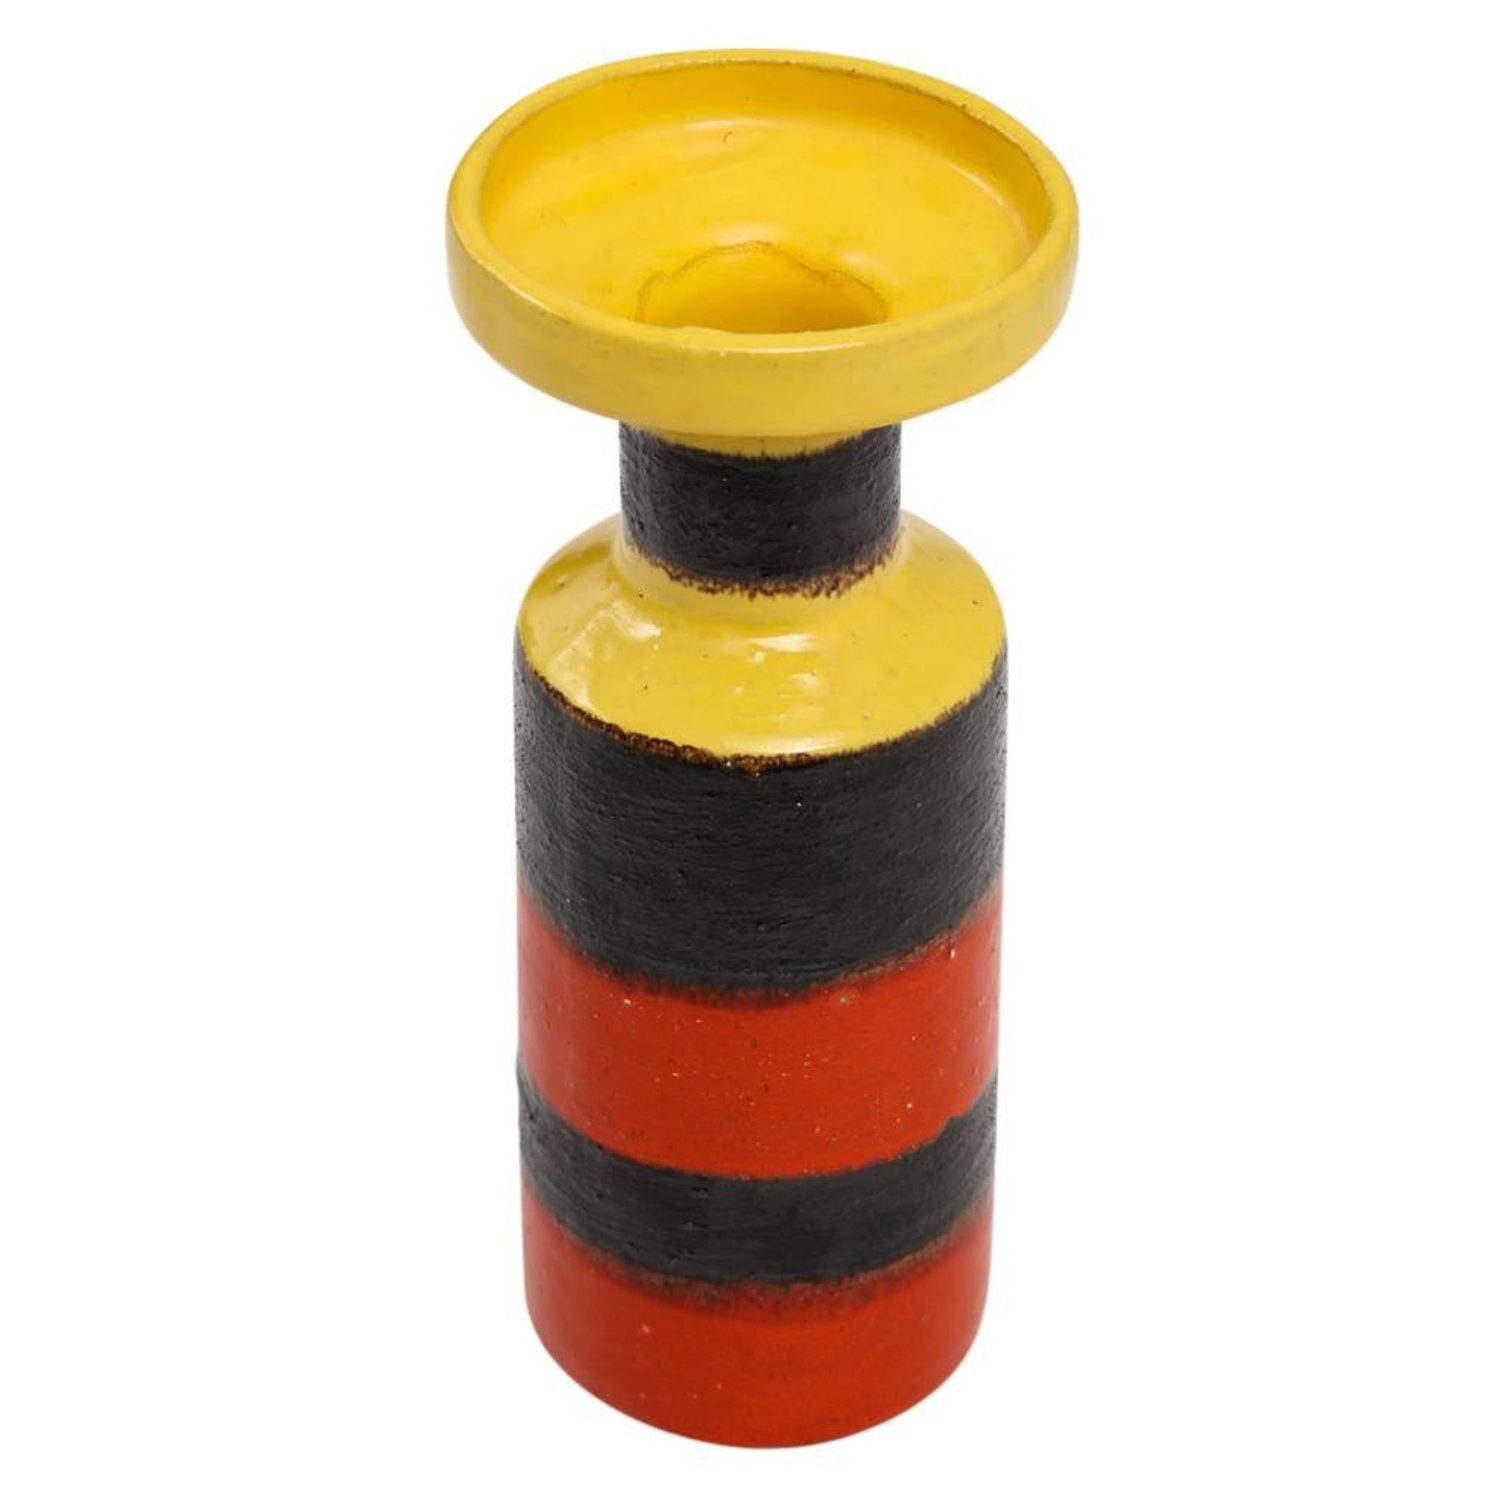 23 Best Large Ceramic Flower Vase 2024 free download large ceramic flower vase of bitossi ceramic vase pottery stripes yellow red black signed italy pertaining to bitossi ceramic vase pottery stripes yellow red black signed italy 1960s for sal